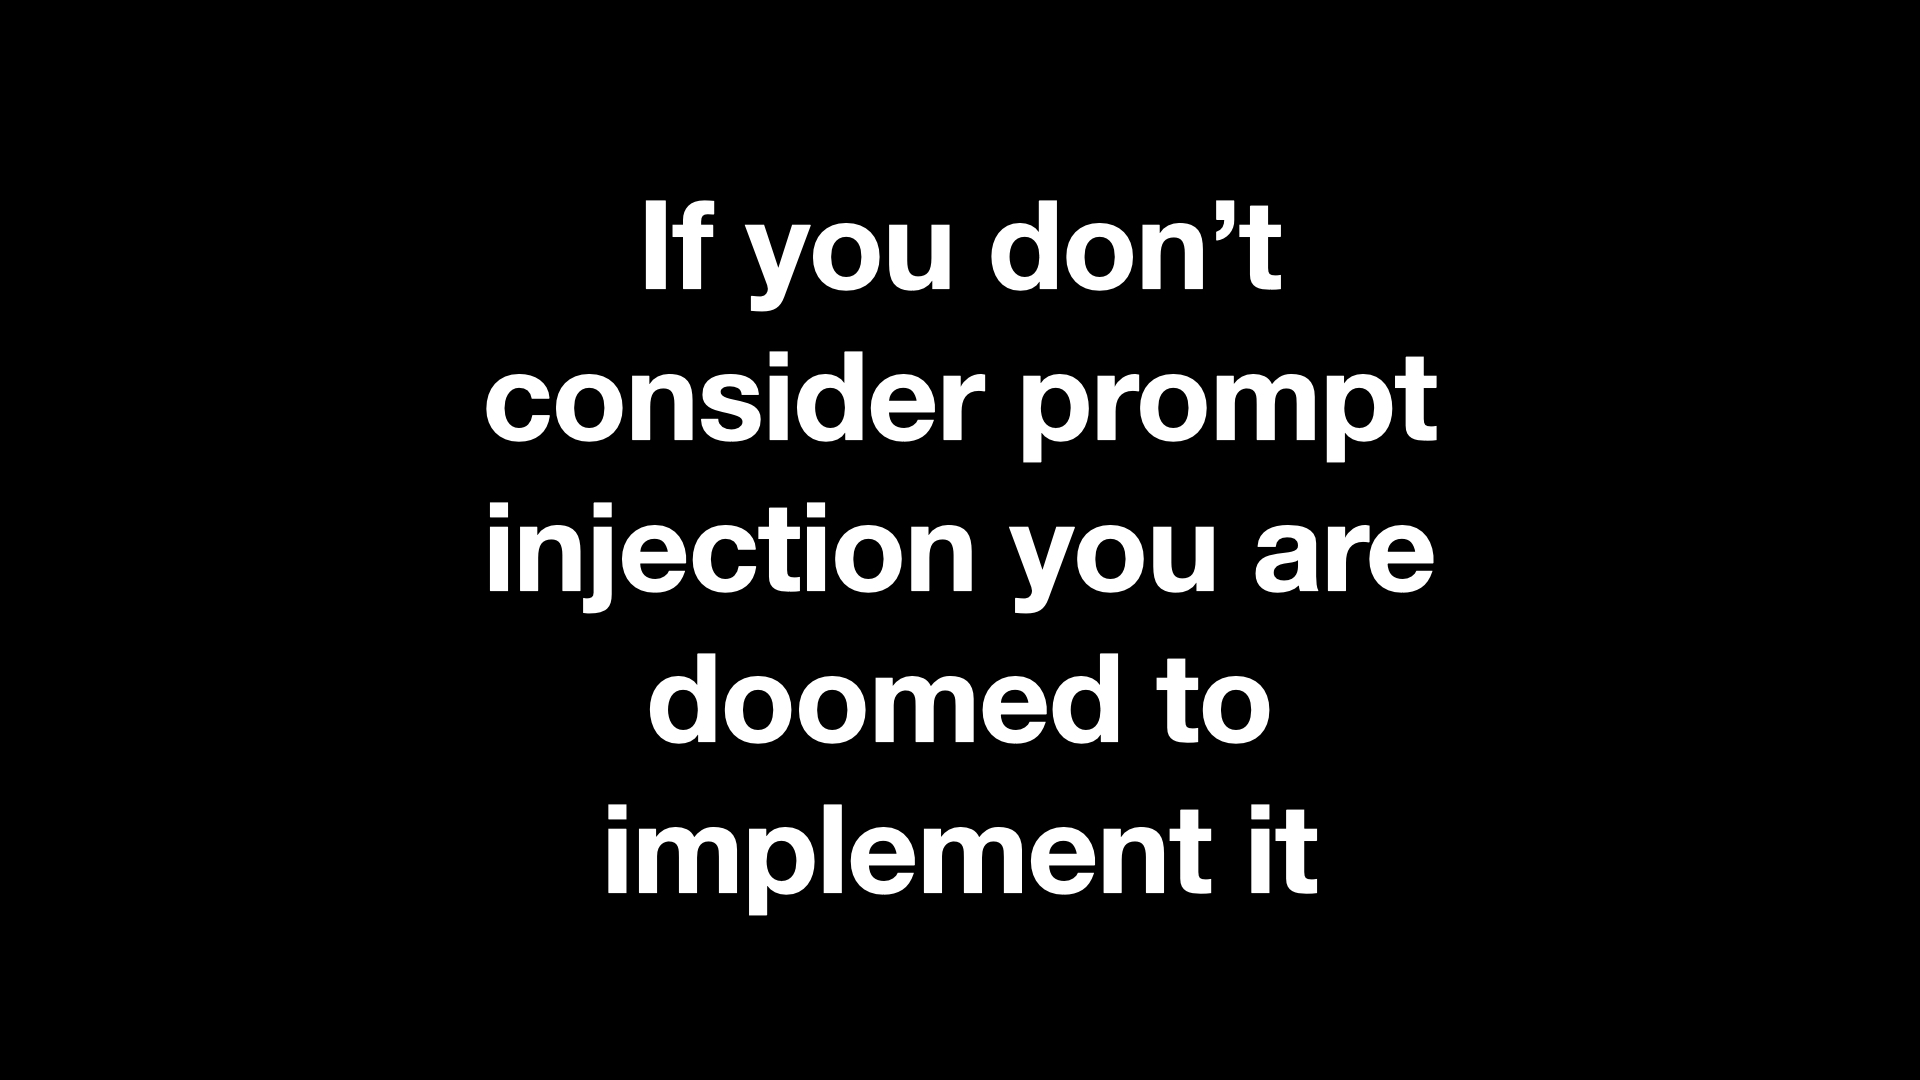 If you don't consider prompt injection you are doomed to implement it